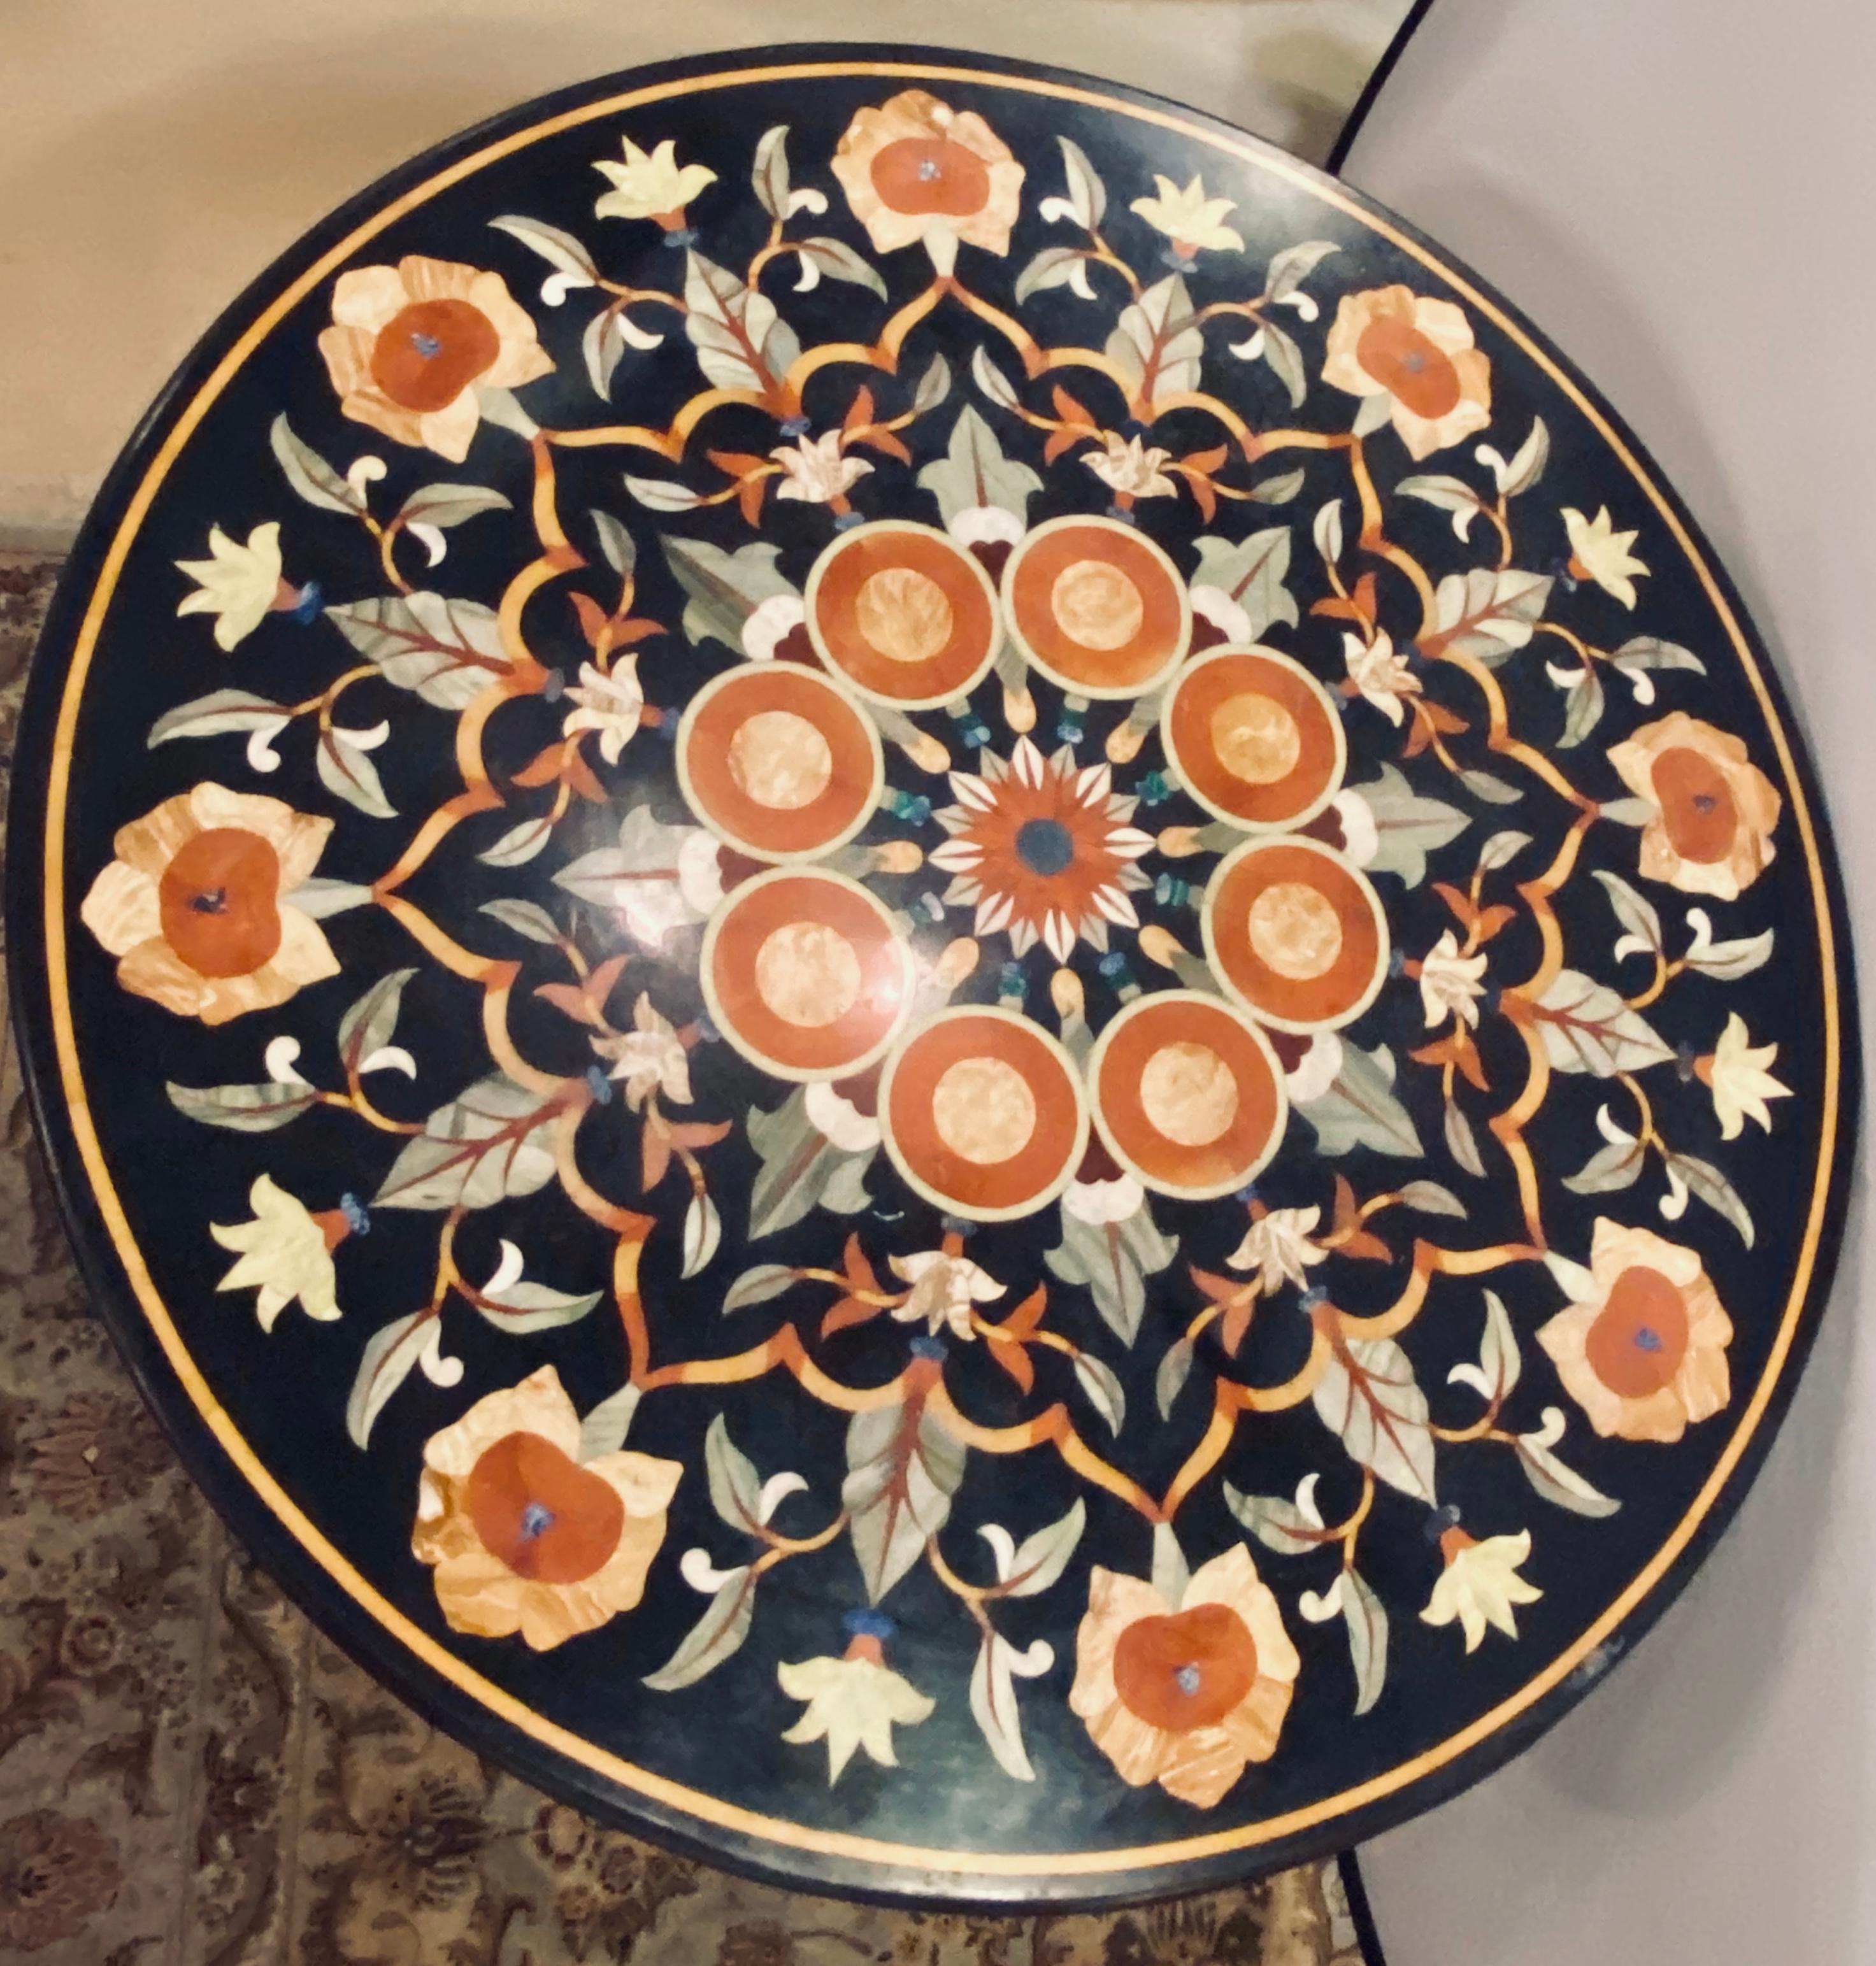 Mid-20th Century Pietra Dura Marble-Top Dining or Center Table, Arts & Crafts Movement